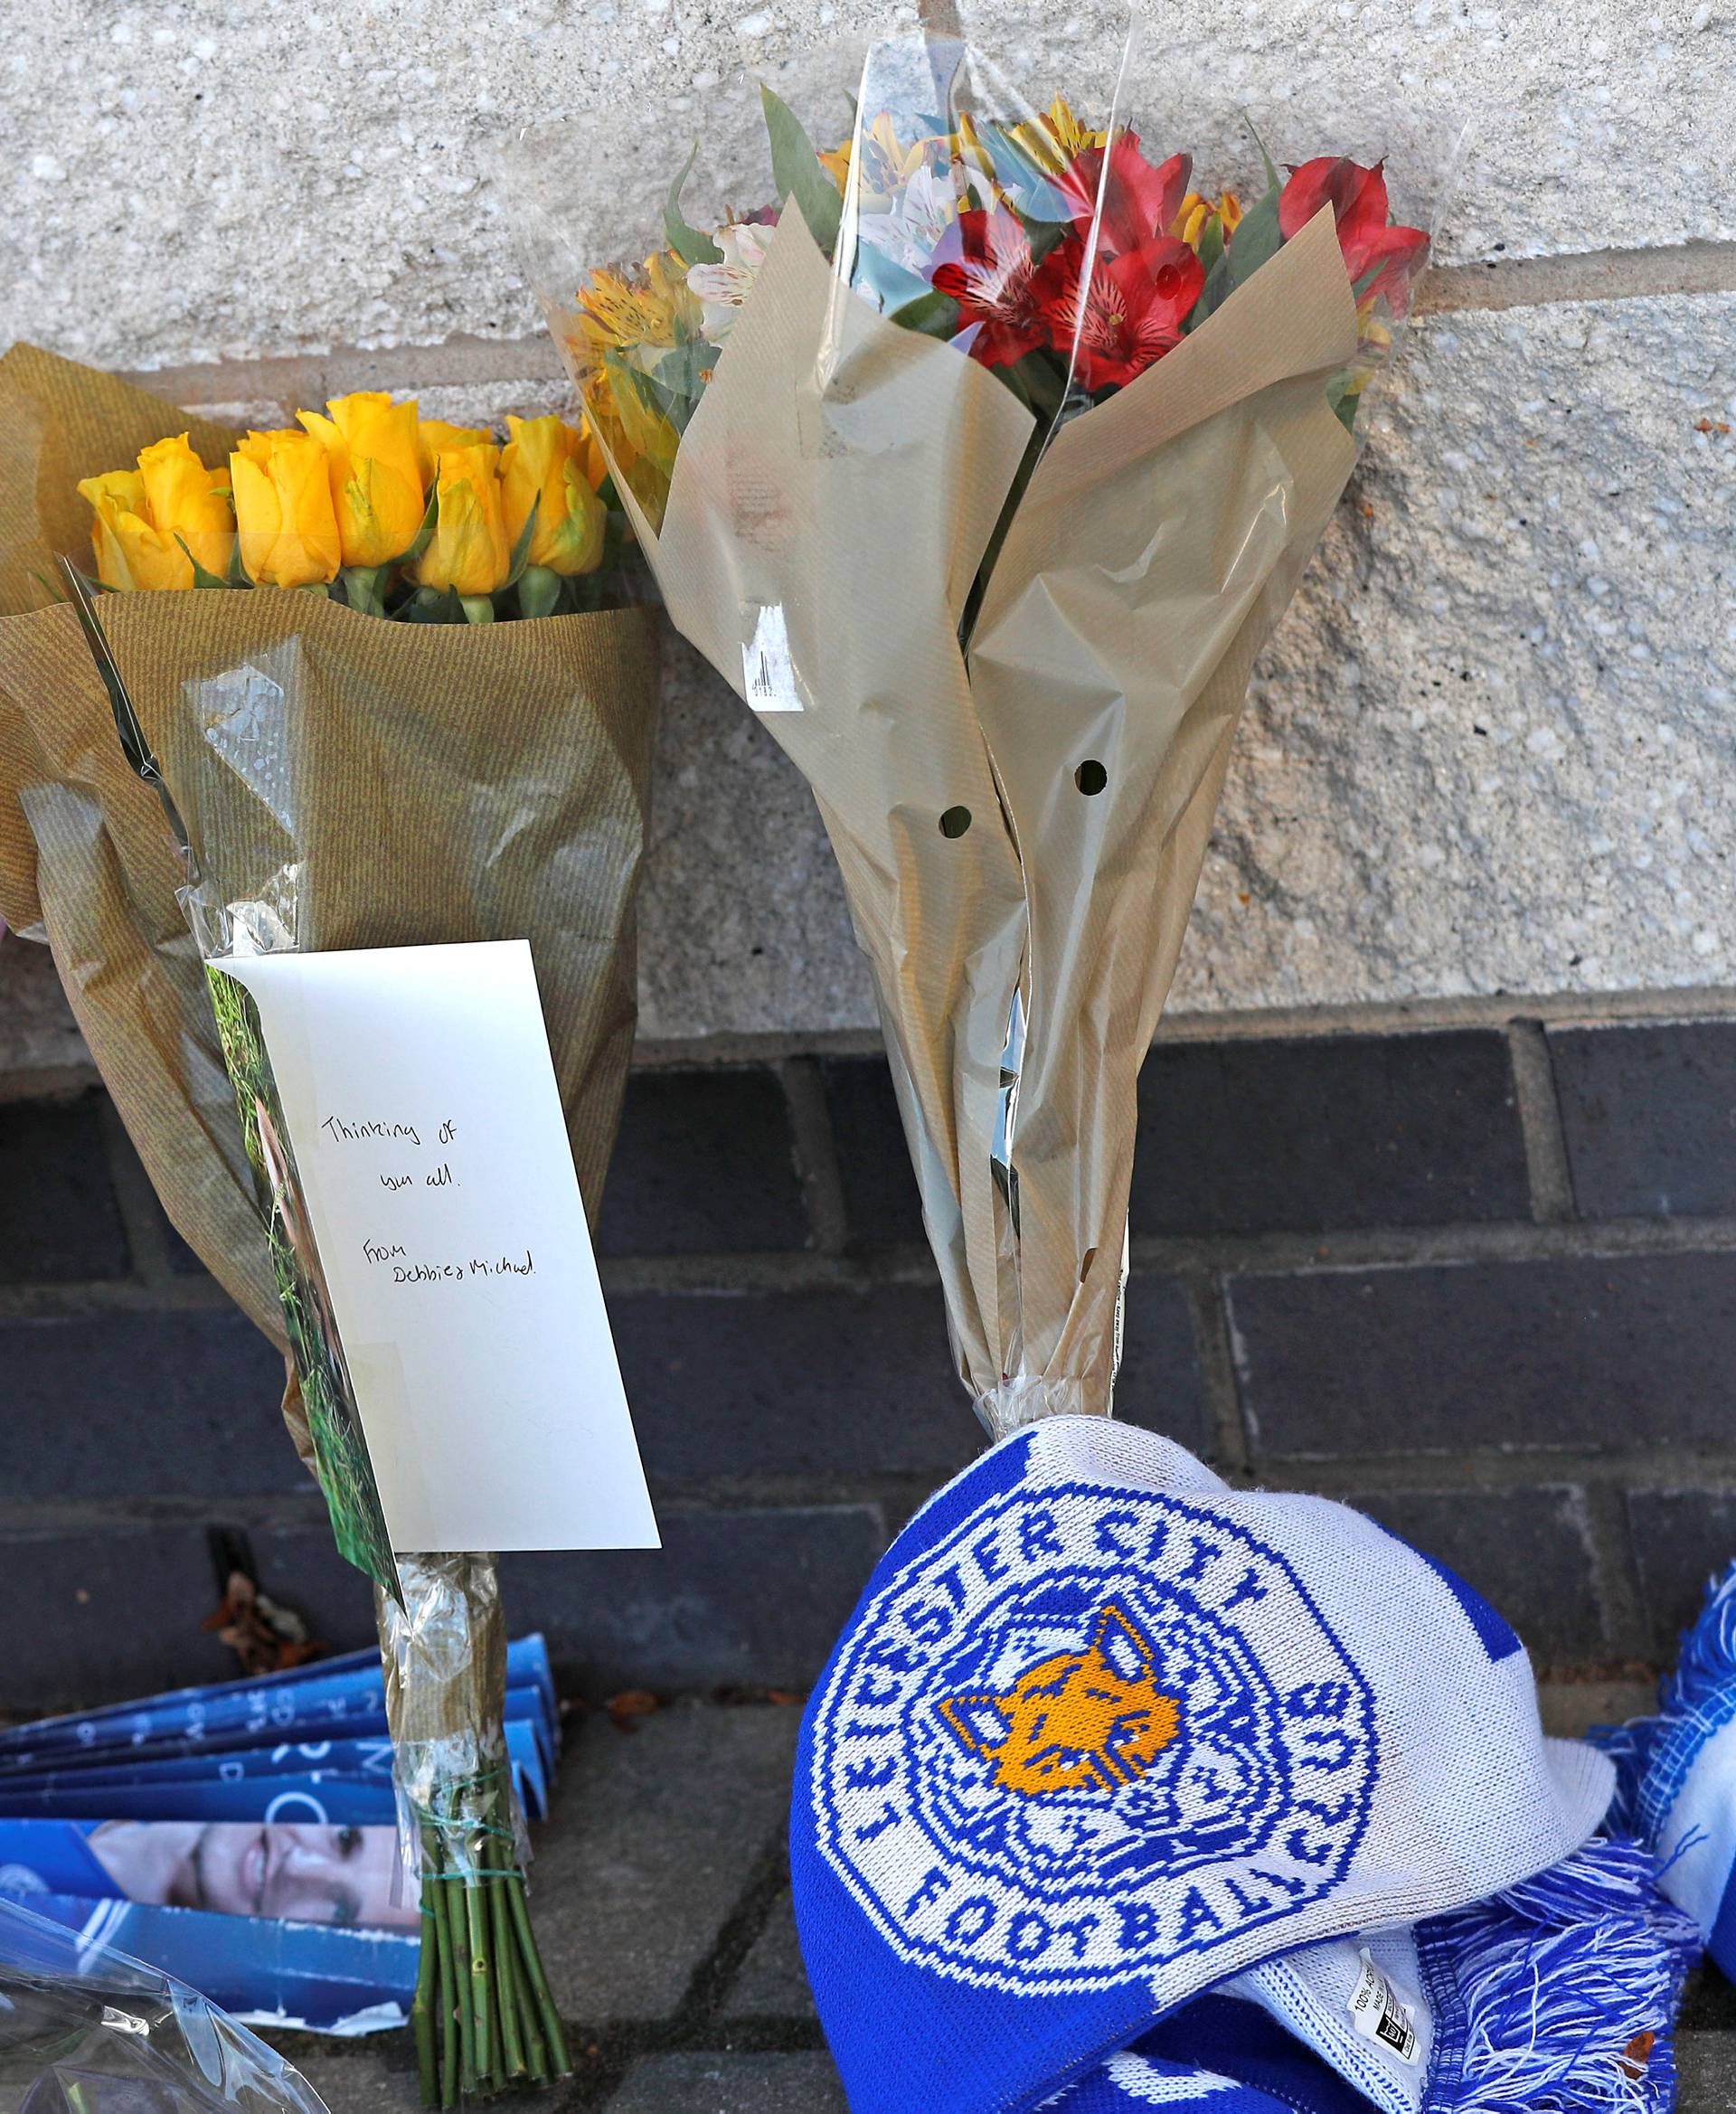 Messages and flowers can be seen placed outside Leicester City football stadium after the helicopter of the club owner Thai businessman Vichai Srivaddhanaprabha crashed when leaving the ground on Saturday evening after the match, in Leicester